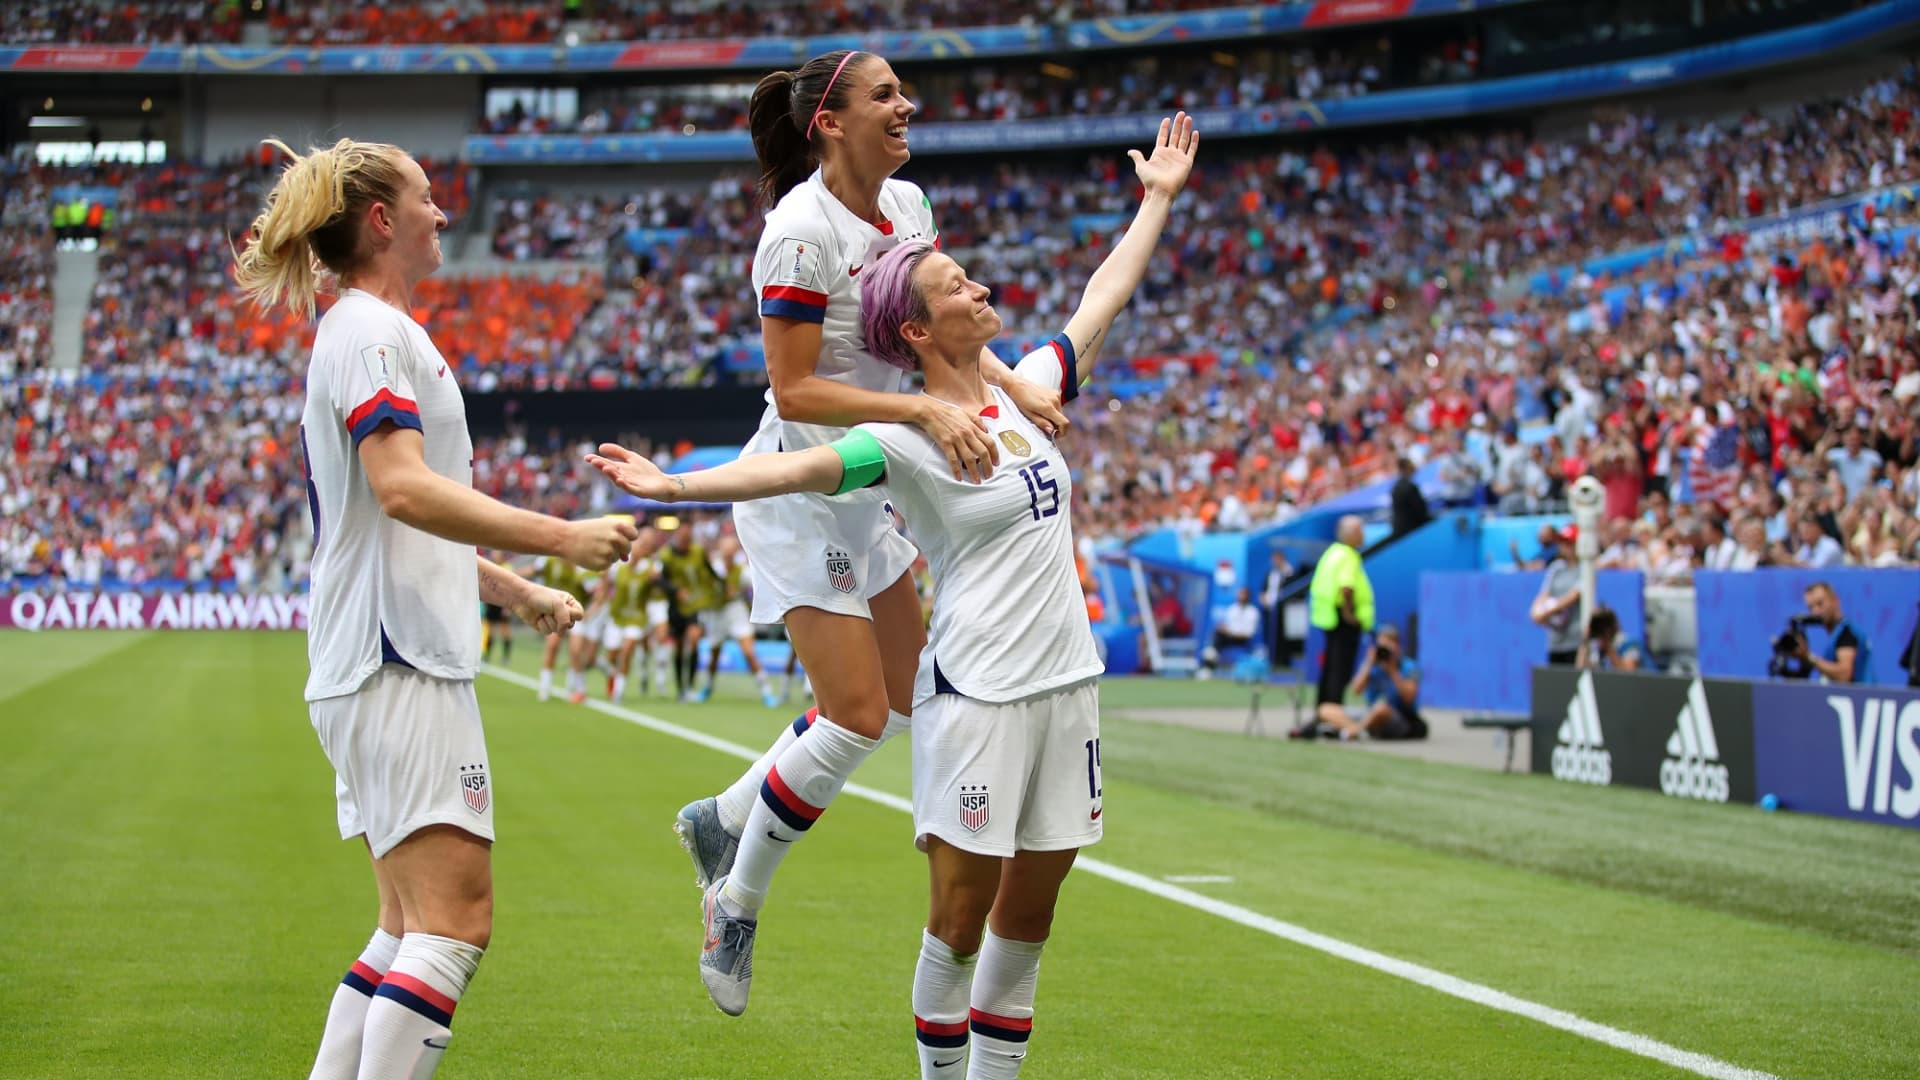 Us Viewership Of The Womens World Cup Final Was Higher Than The Mens